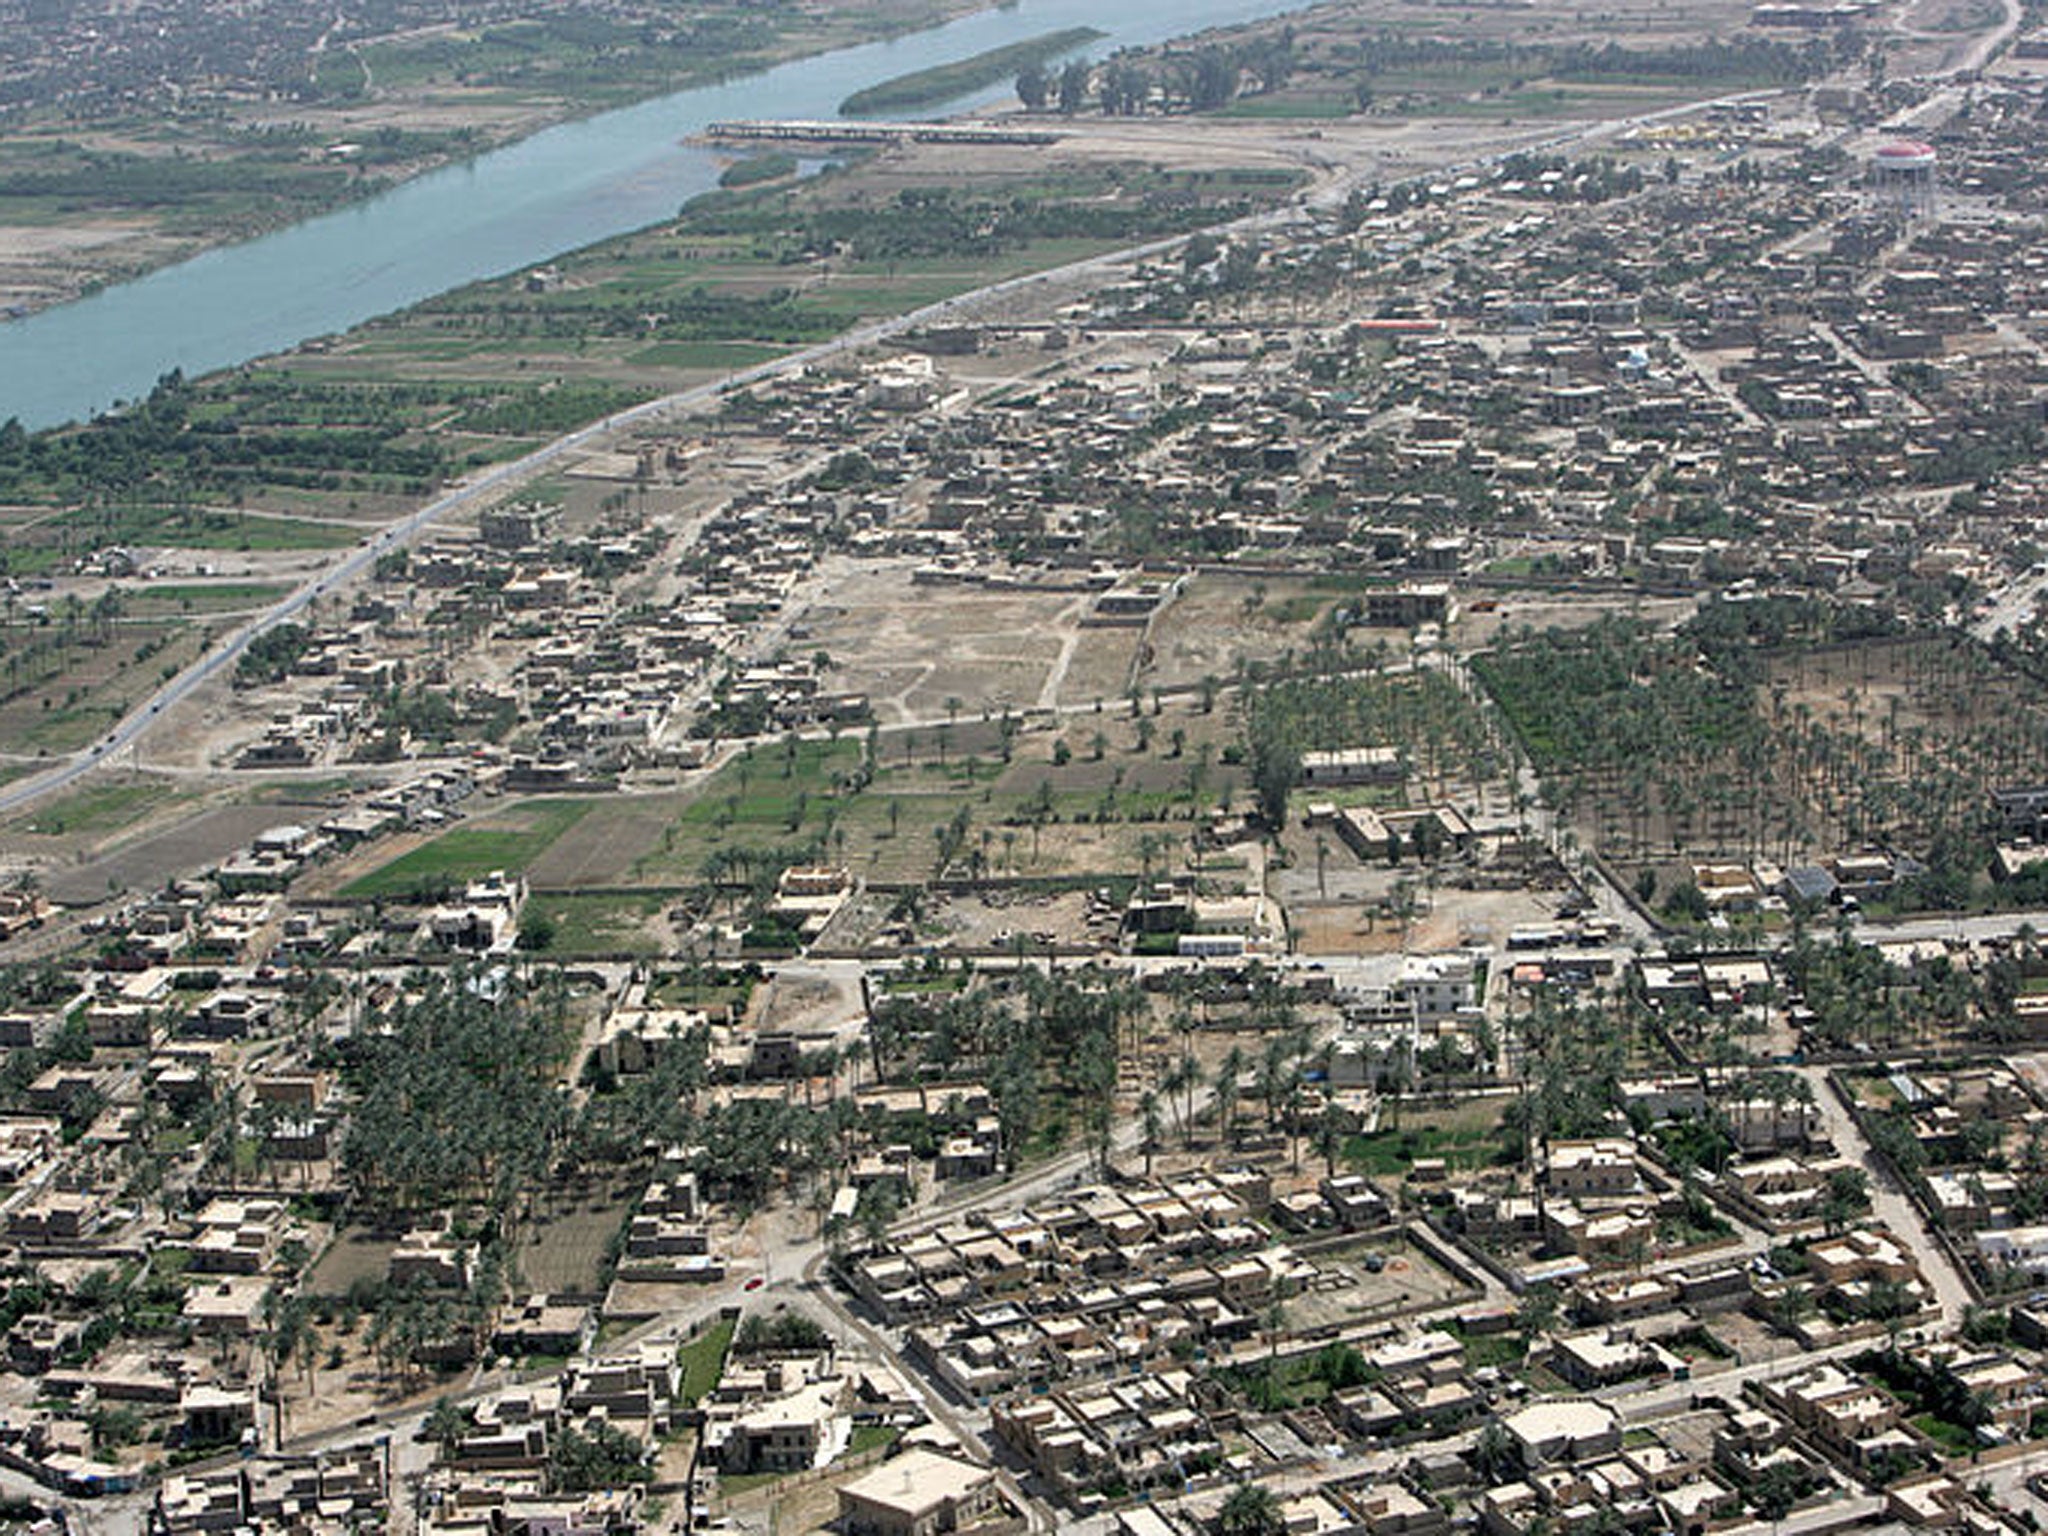 An aerial view of the Euphrates River in Ramadi. Gunman have stormed a university in Iraq and taken dozens of students hostage inside a dormitory at Anbar university